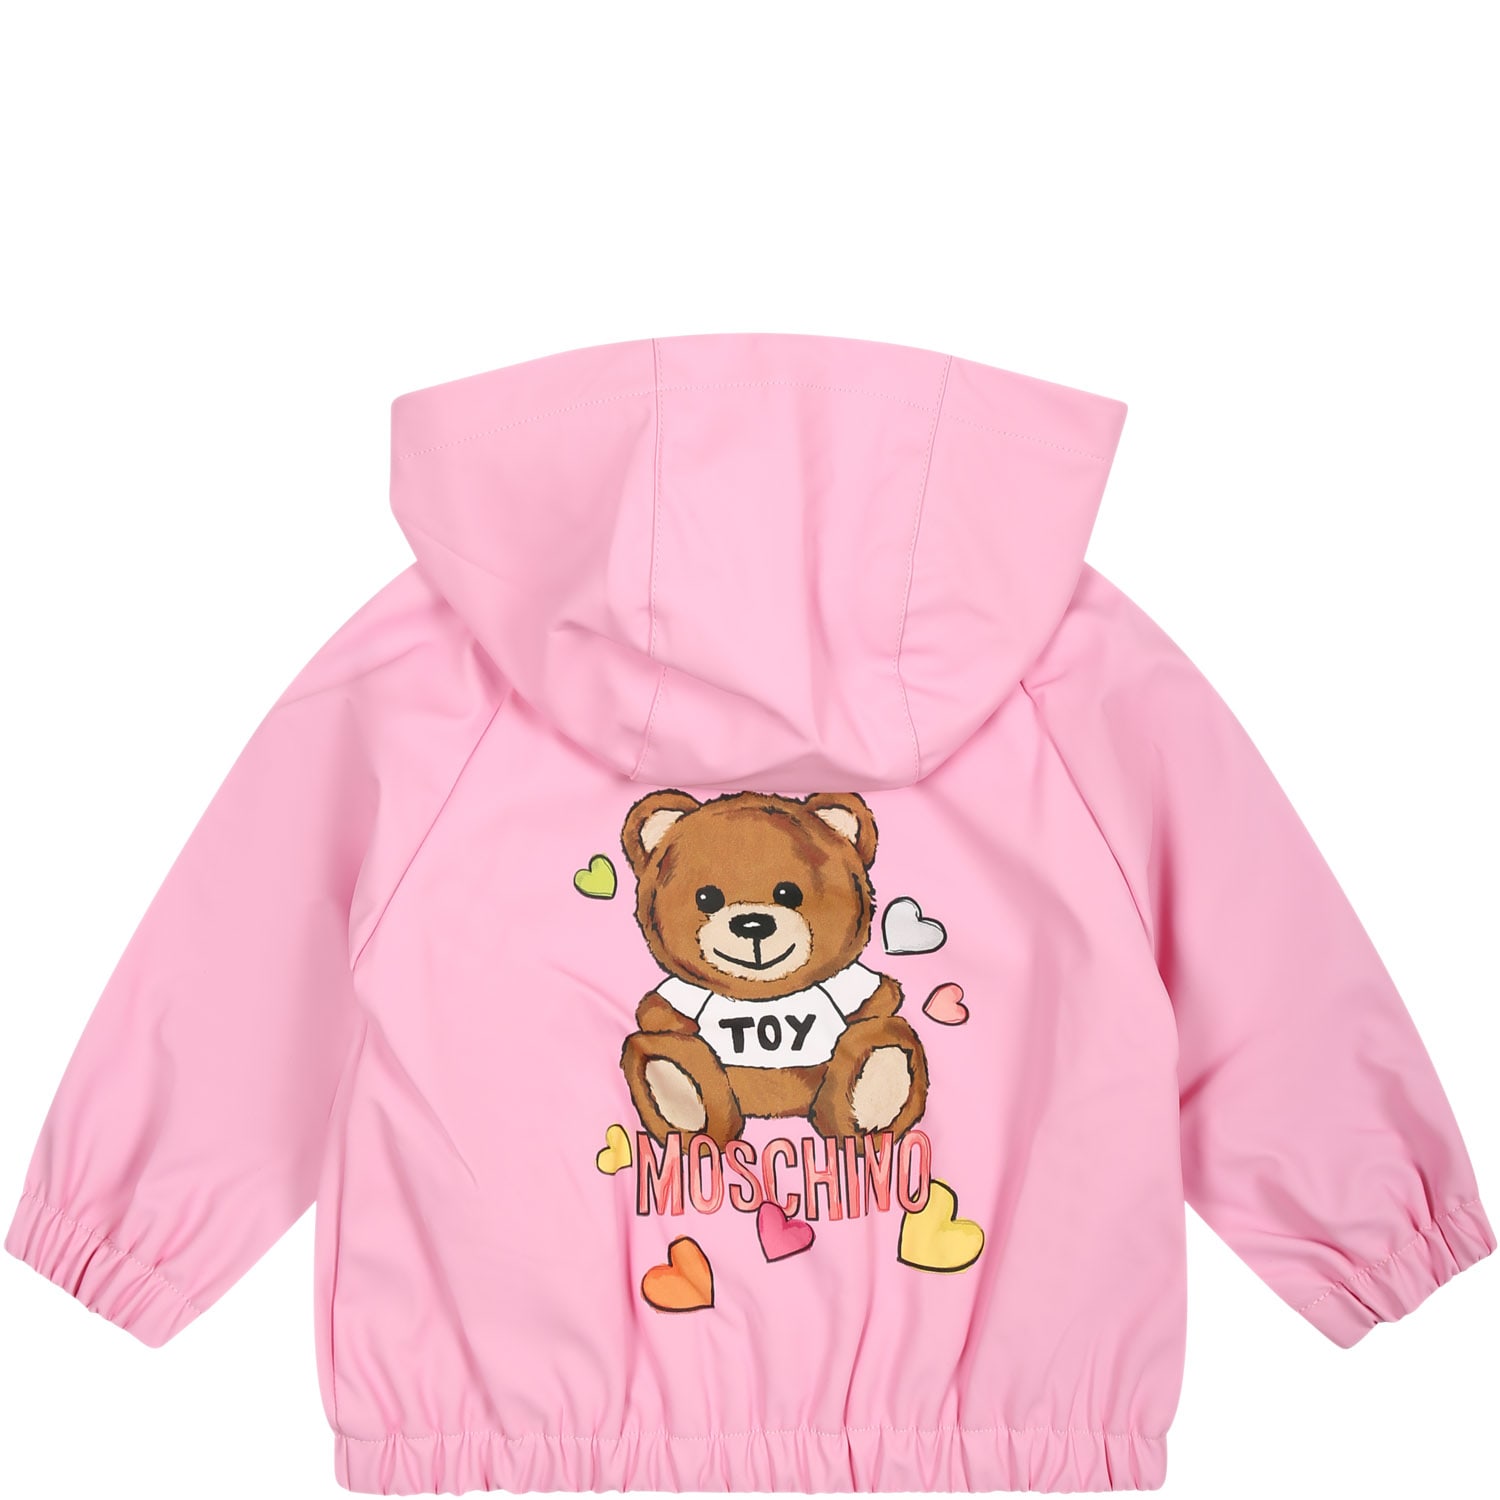 Moschino Pink Windbreaker For Baby Girl With Teddy Bear